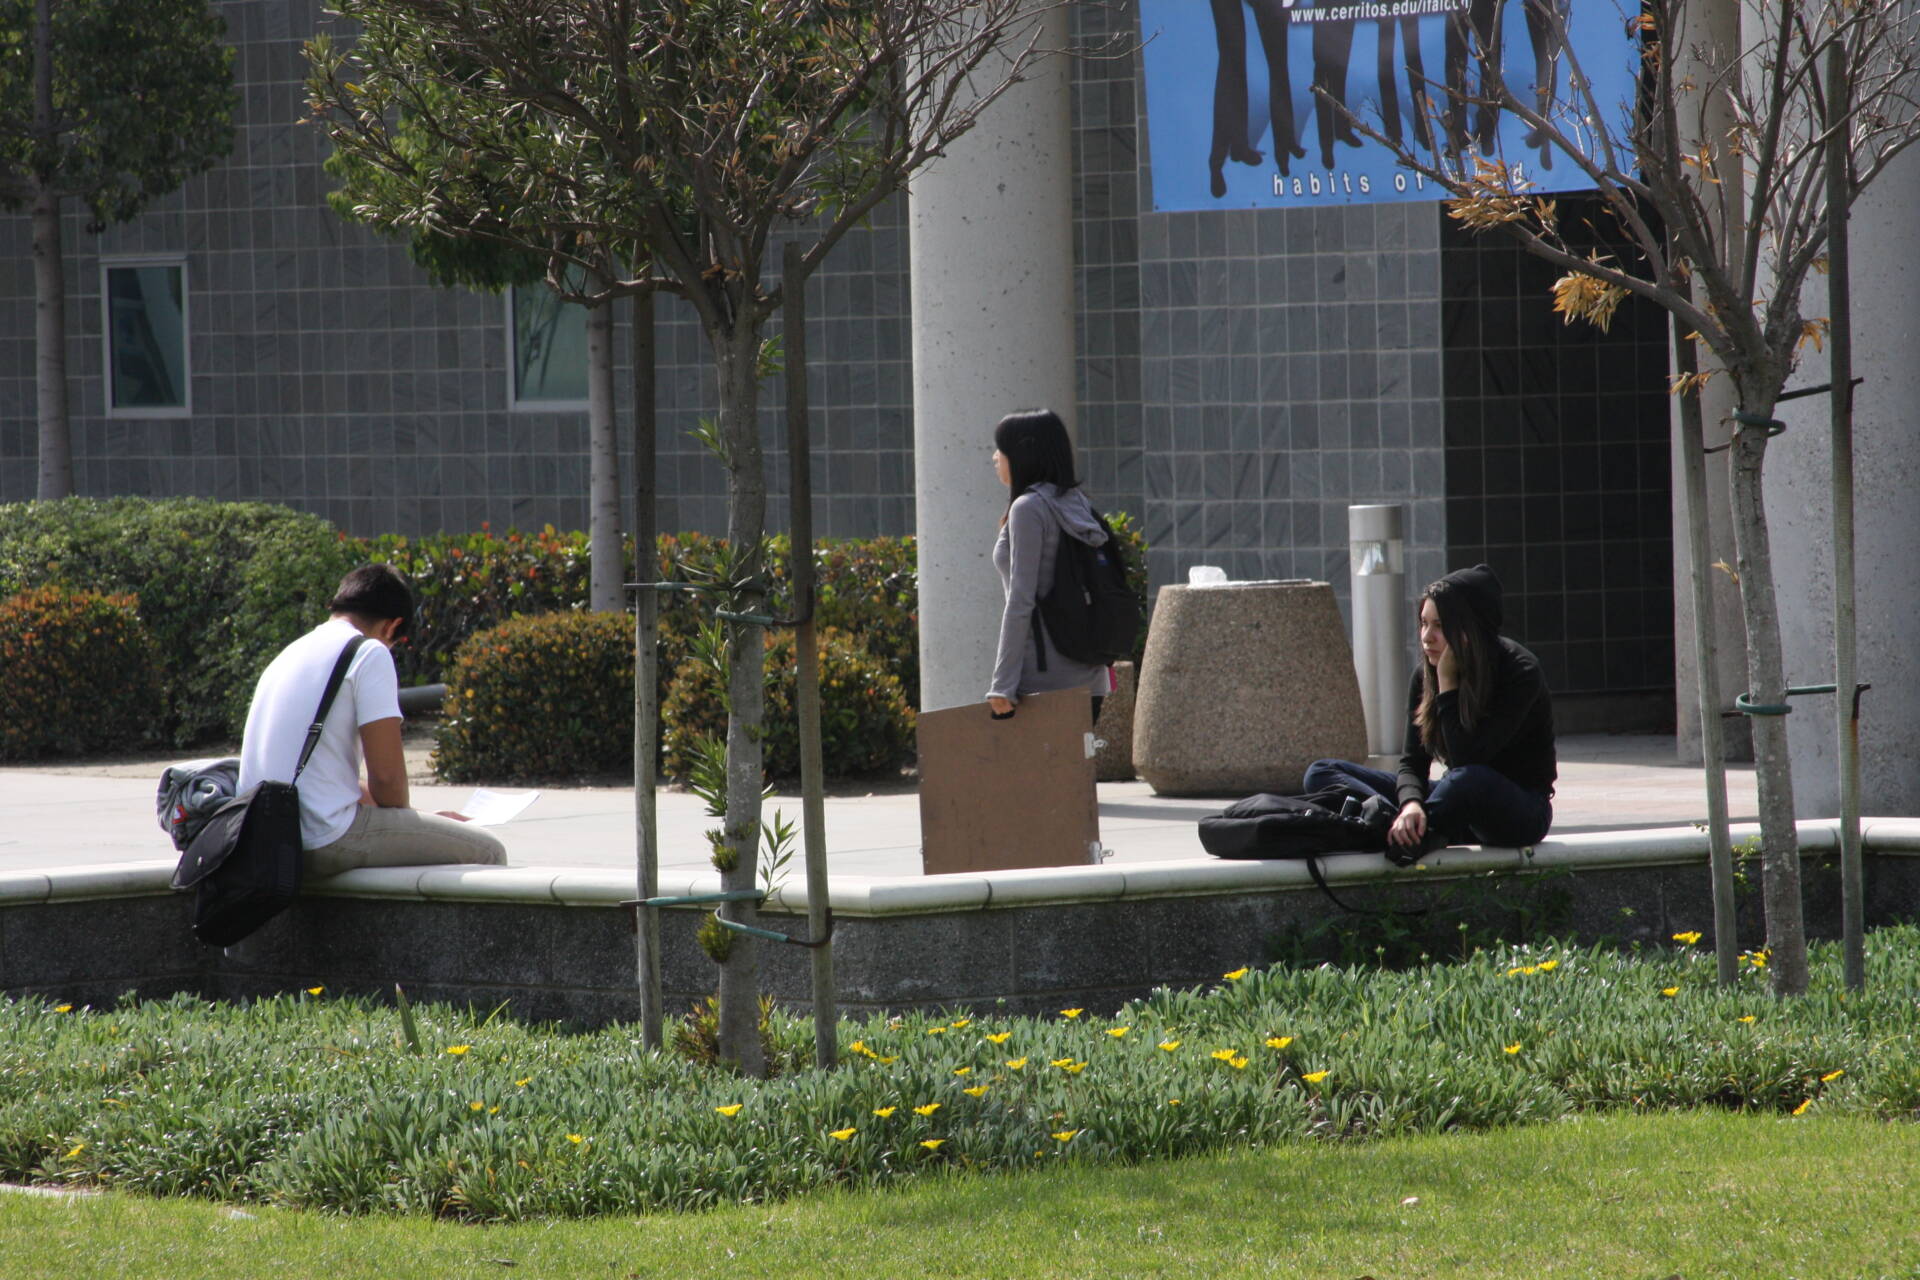 Two Cerritos College students, a young man and a young woman, sit on a low stone wall outside a gray classroom building. A third woman is passing by them on the sidewalk, carrying an artist's portfolio.